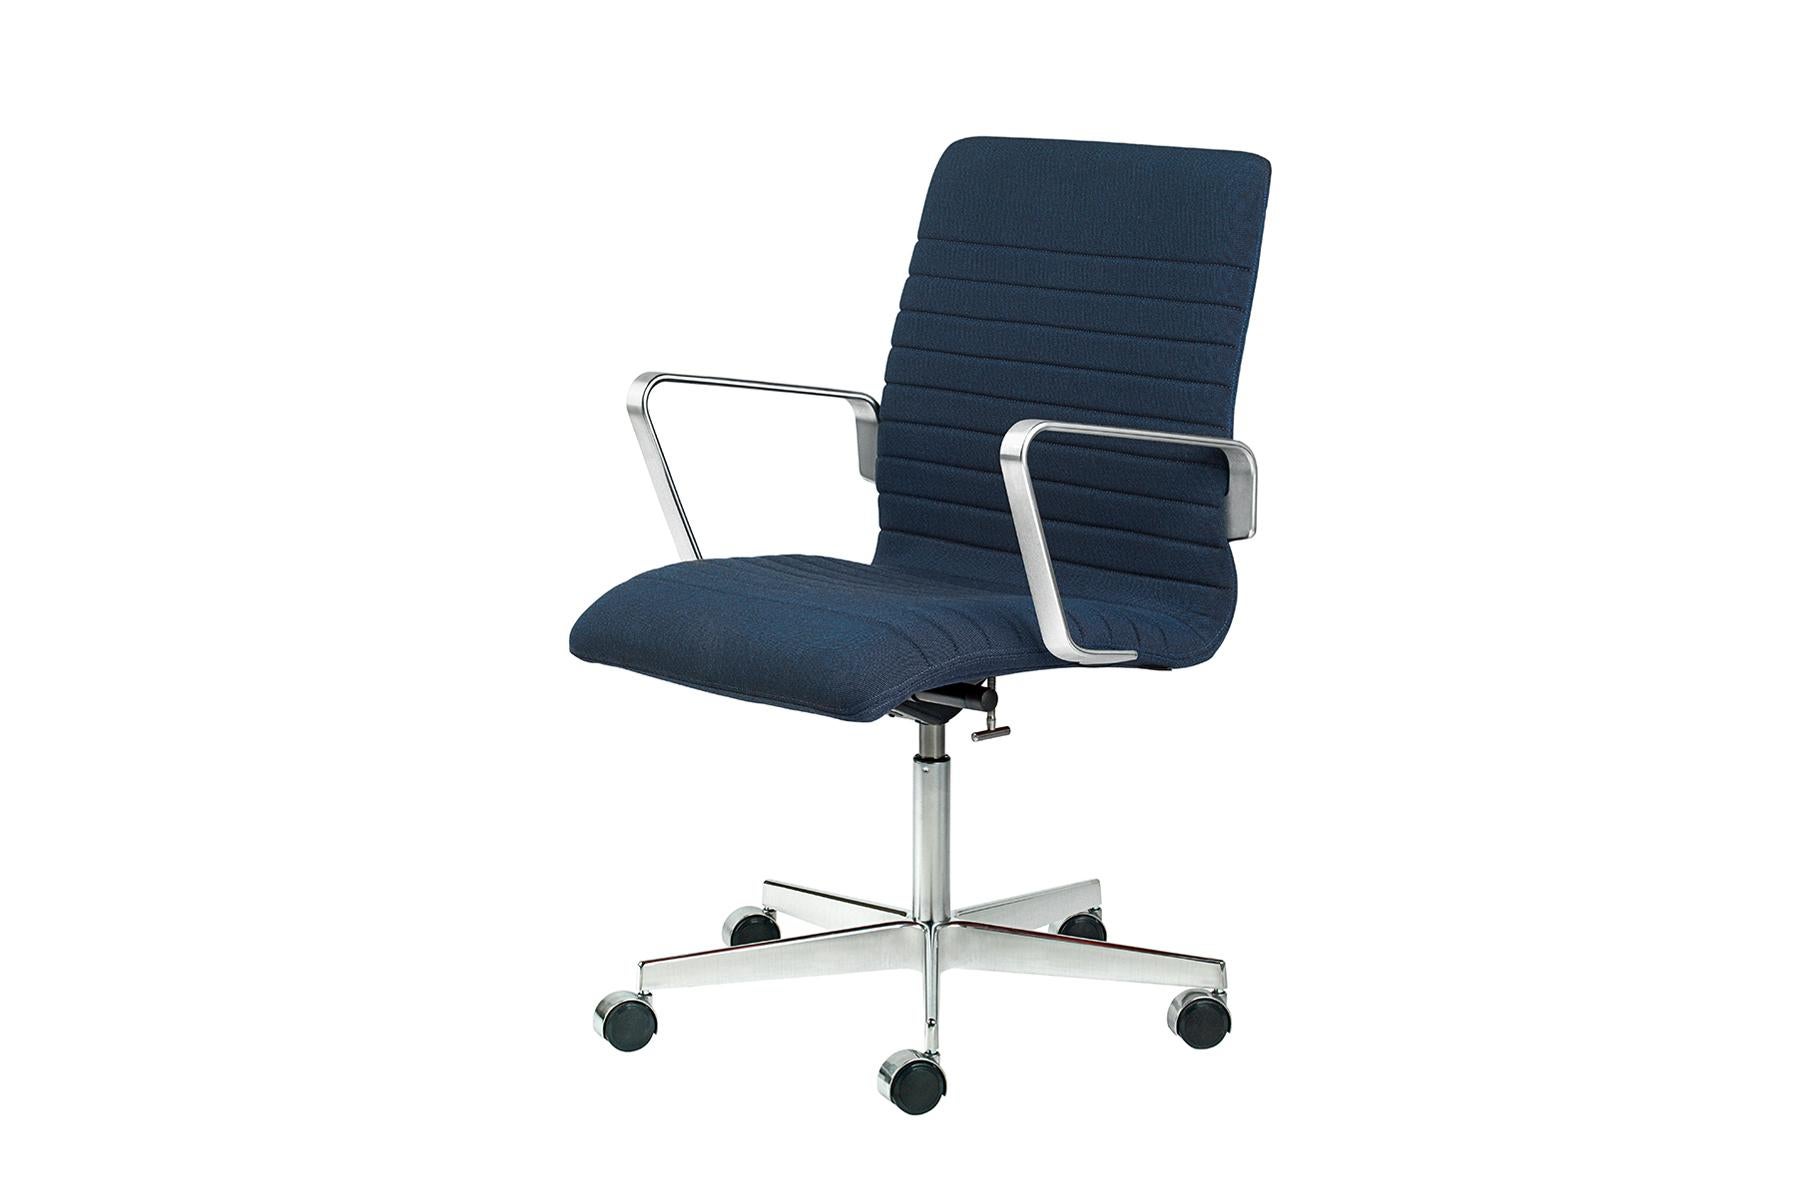 Do you demand comfort from your home office? Then you need to experience the Oxford Premium. The name reveals an immaculate design, where a broader seat with underplayed stitching, a more robust foam layer and a new colour palette unify quality and